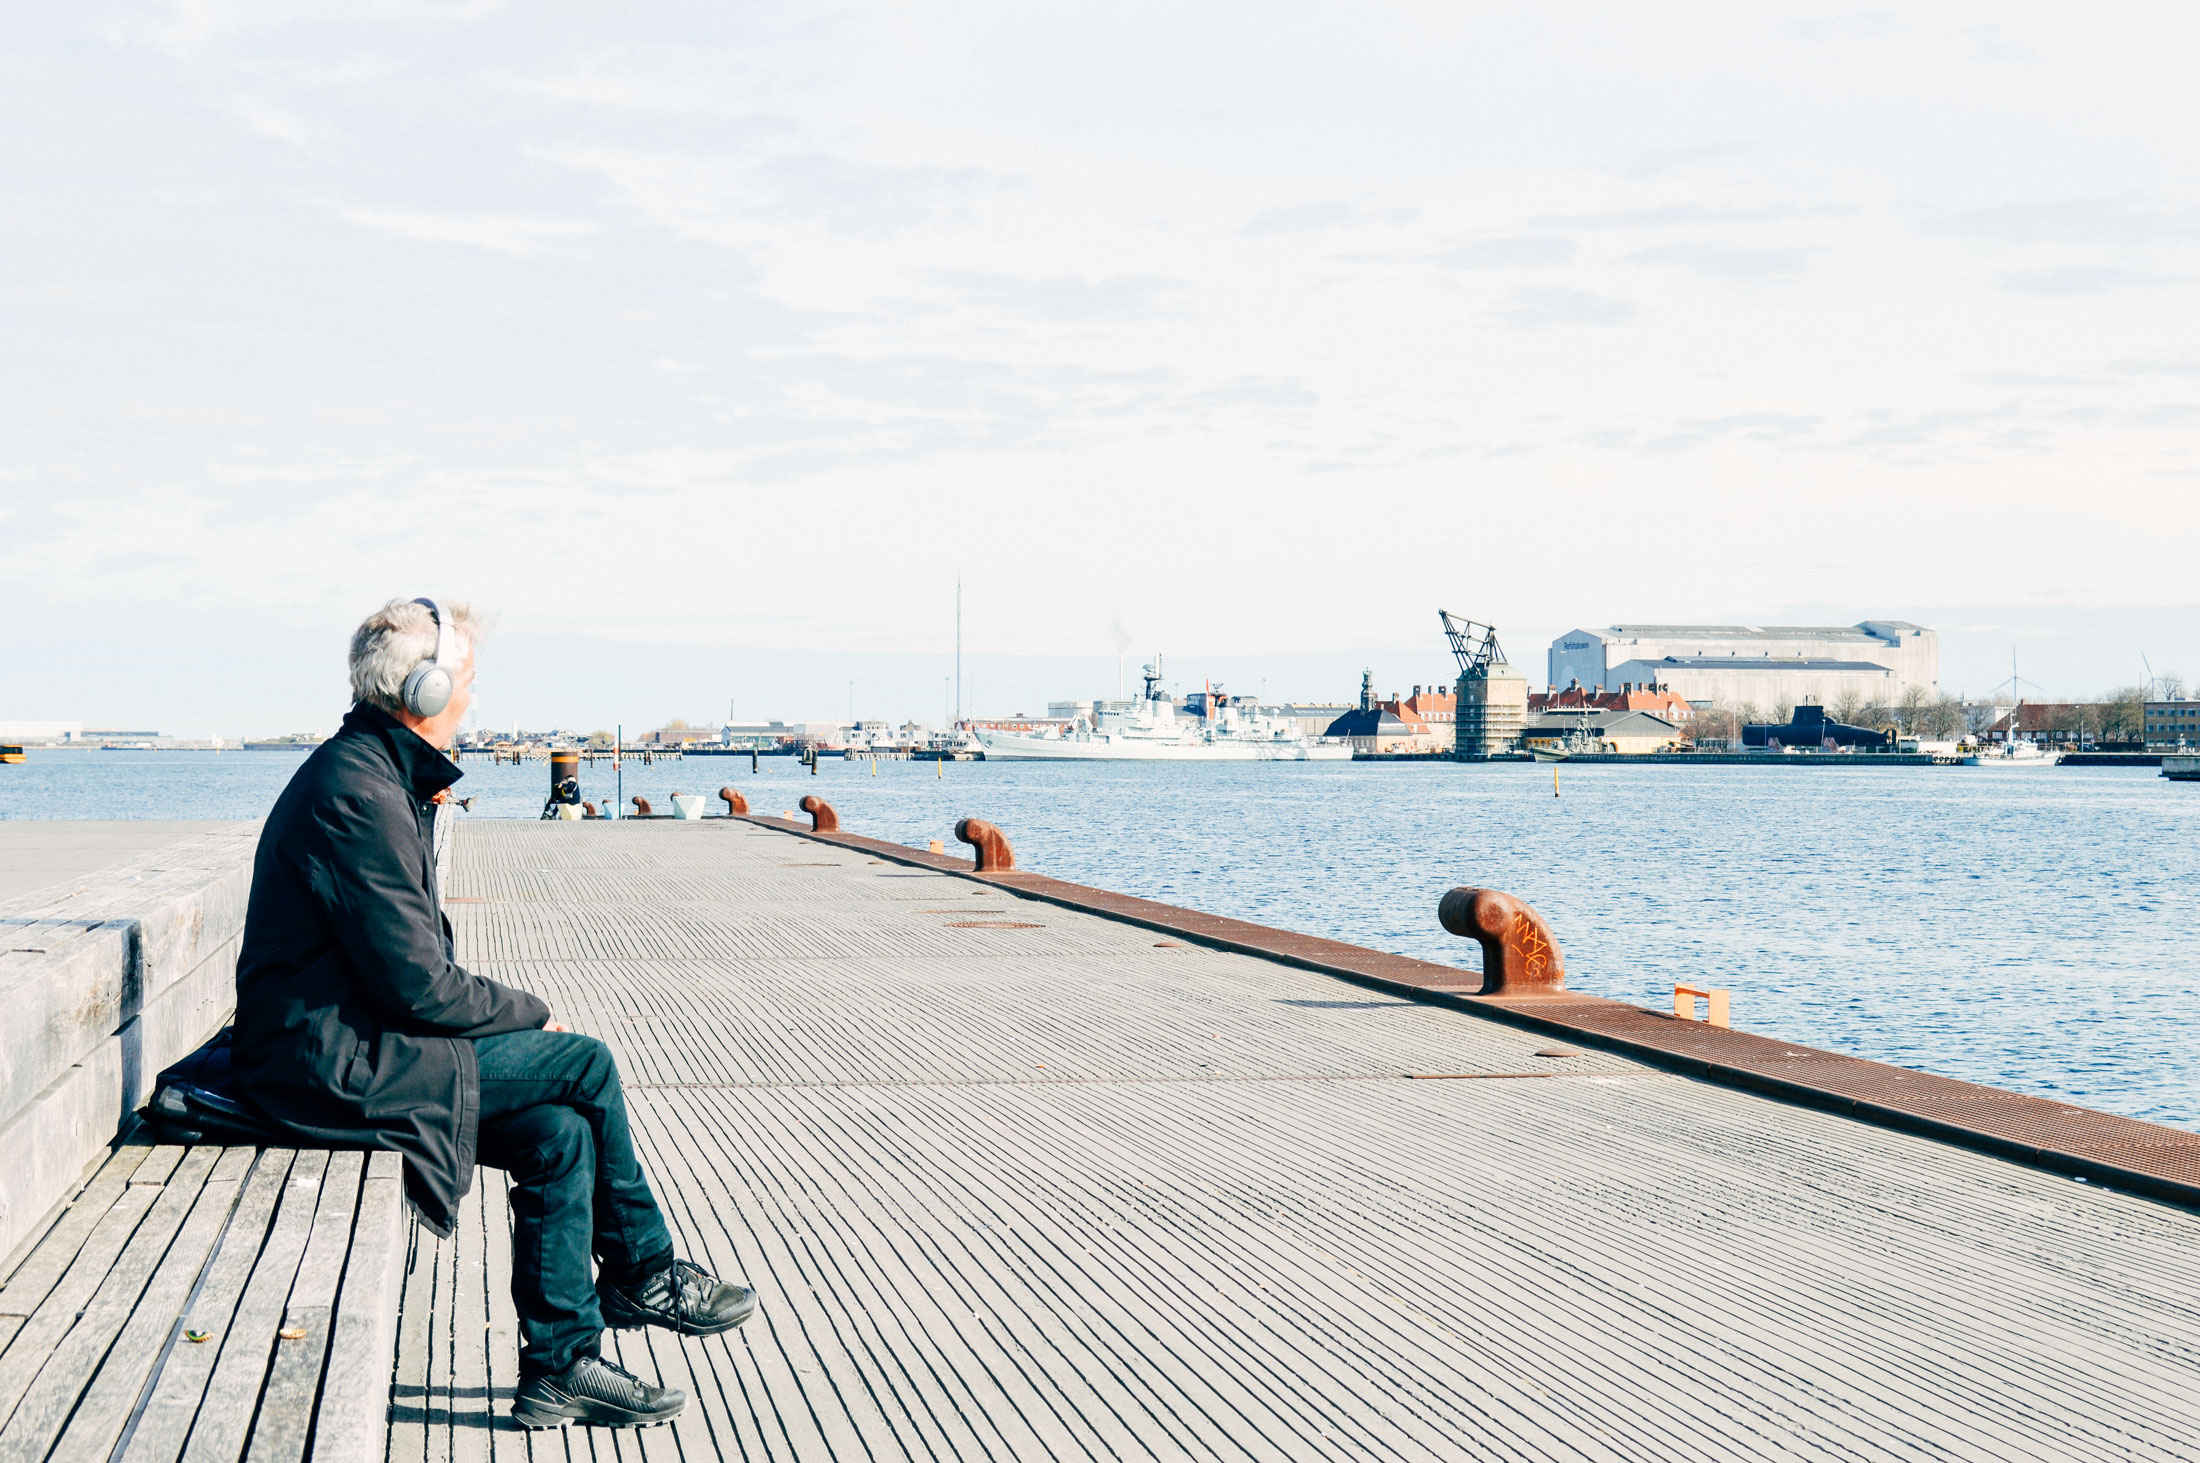 Man sitting on a ledge, on the left on a sea pier, looking to the right, that shows the sea and docklands, then factories in the far distance. The sky cover the top half.